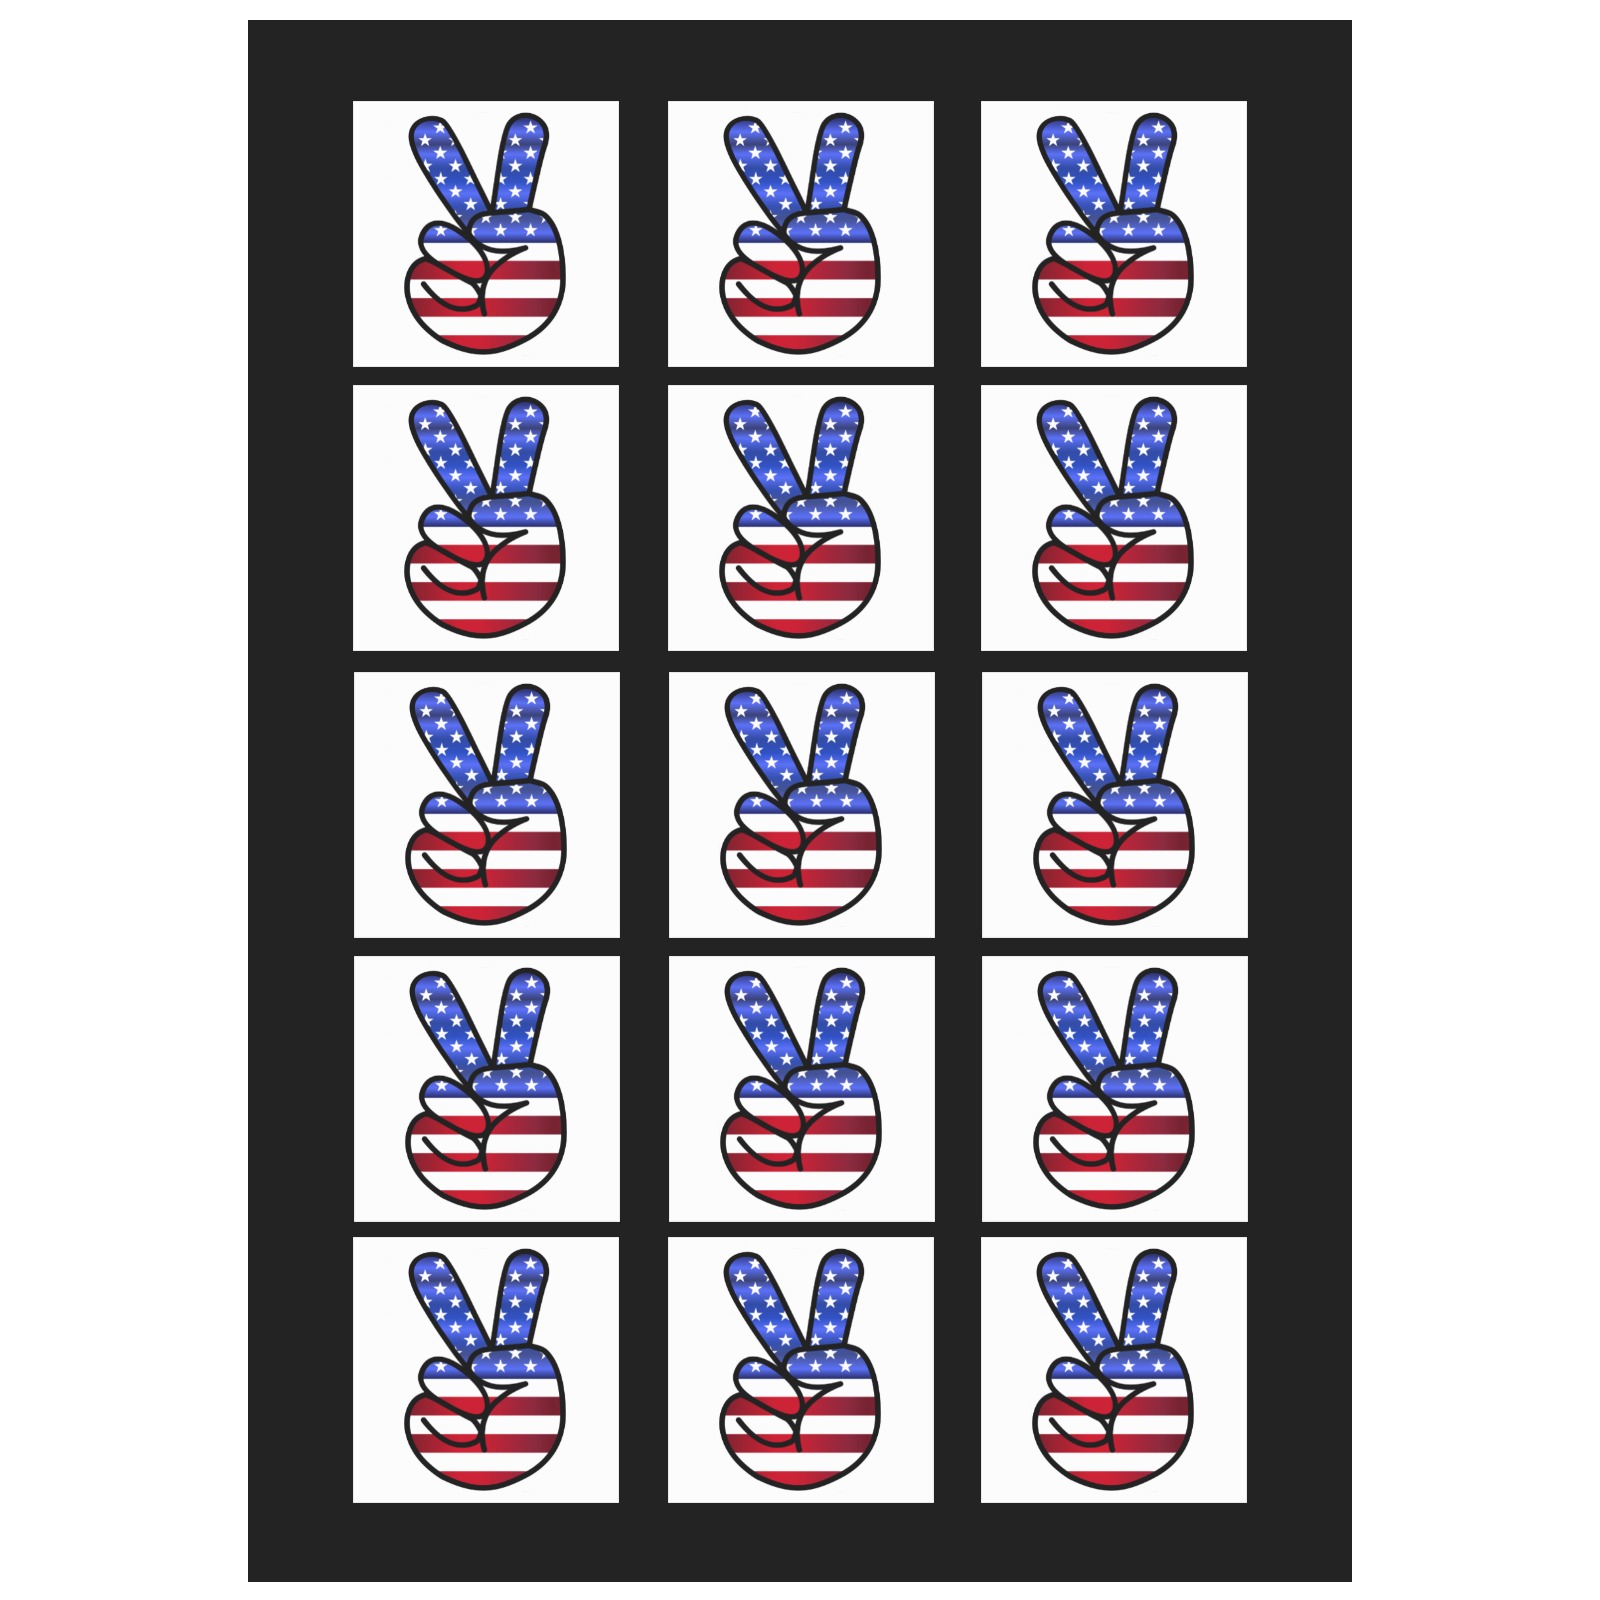 USA Victory Flag Symbol - Courtesy of Pnghut Personalized Temporary Tattoo (15 Pieces)